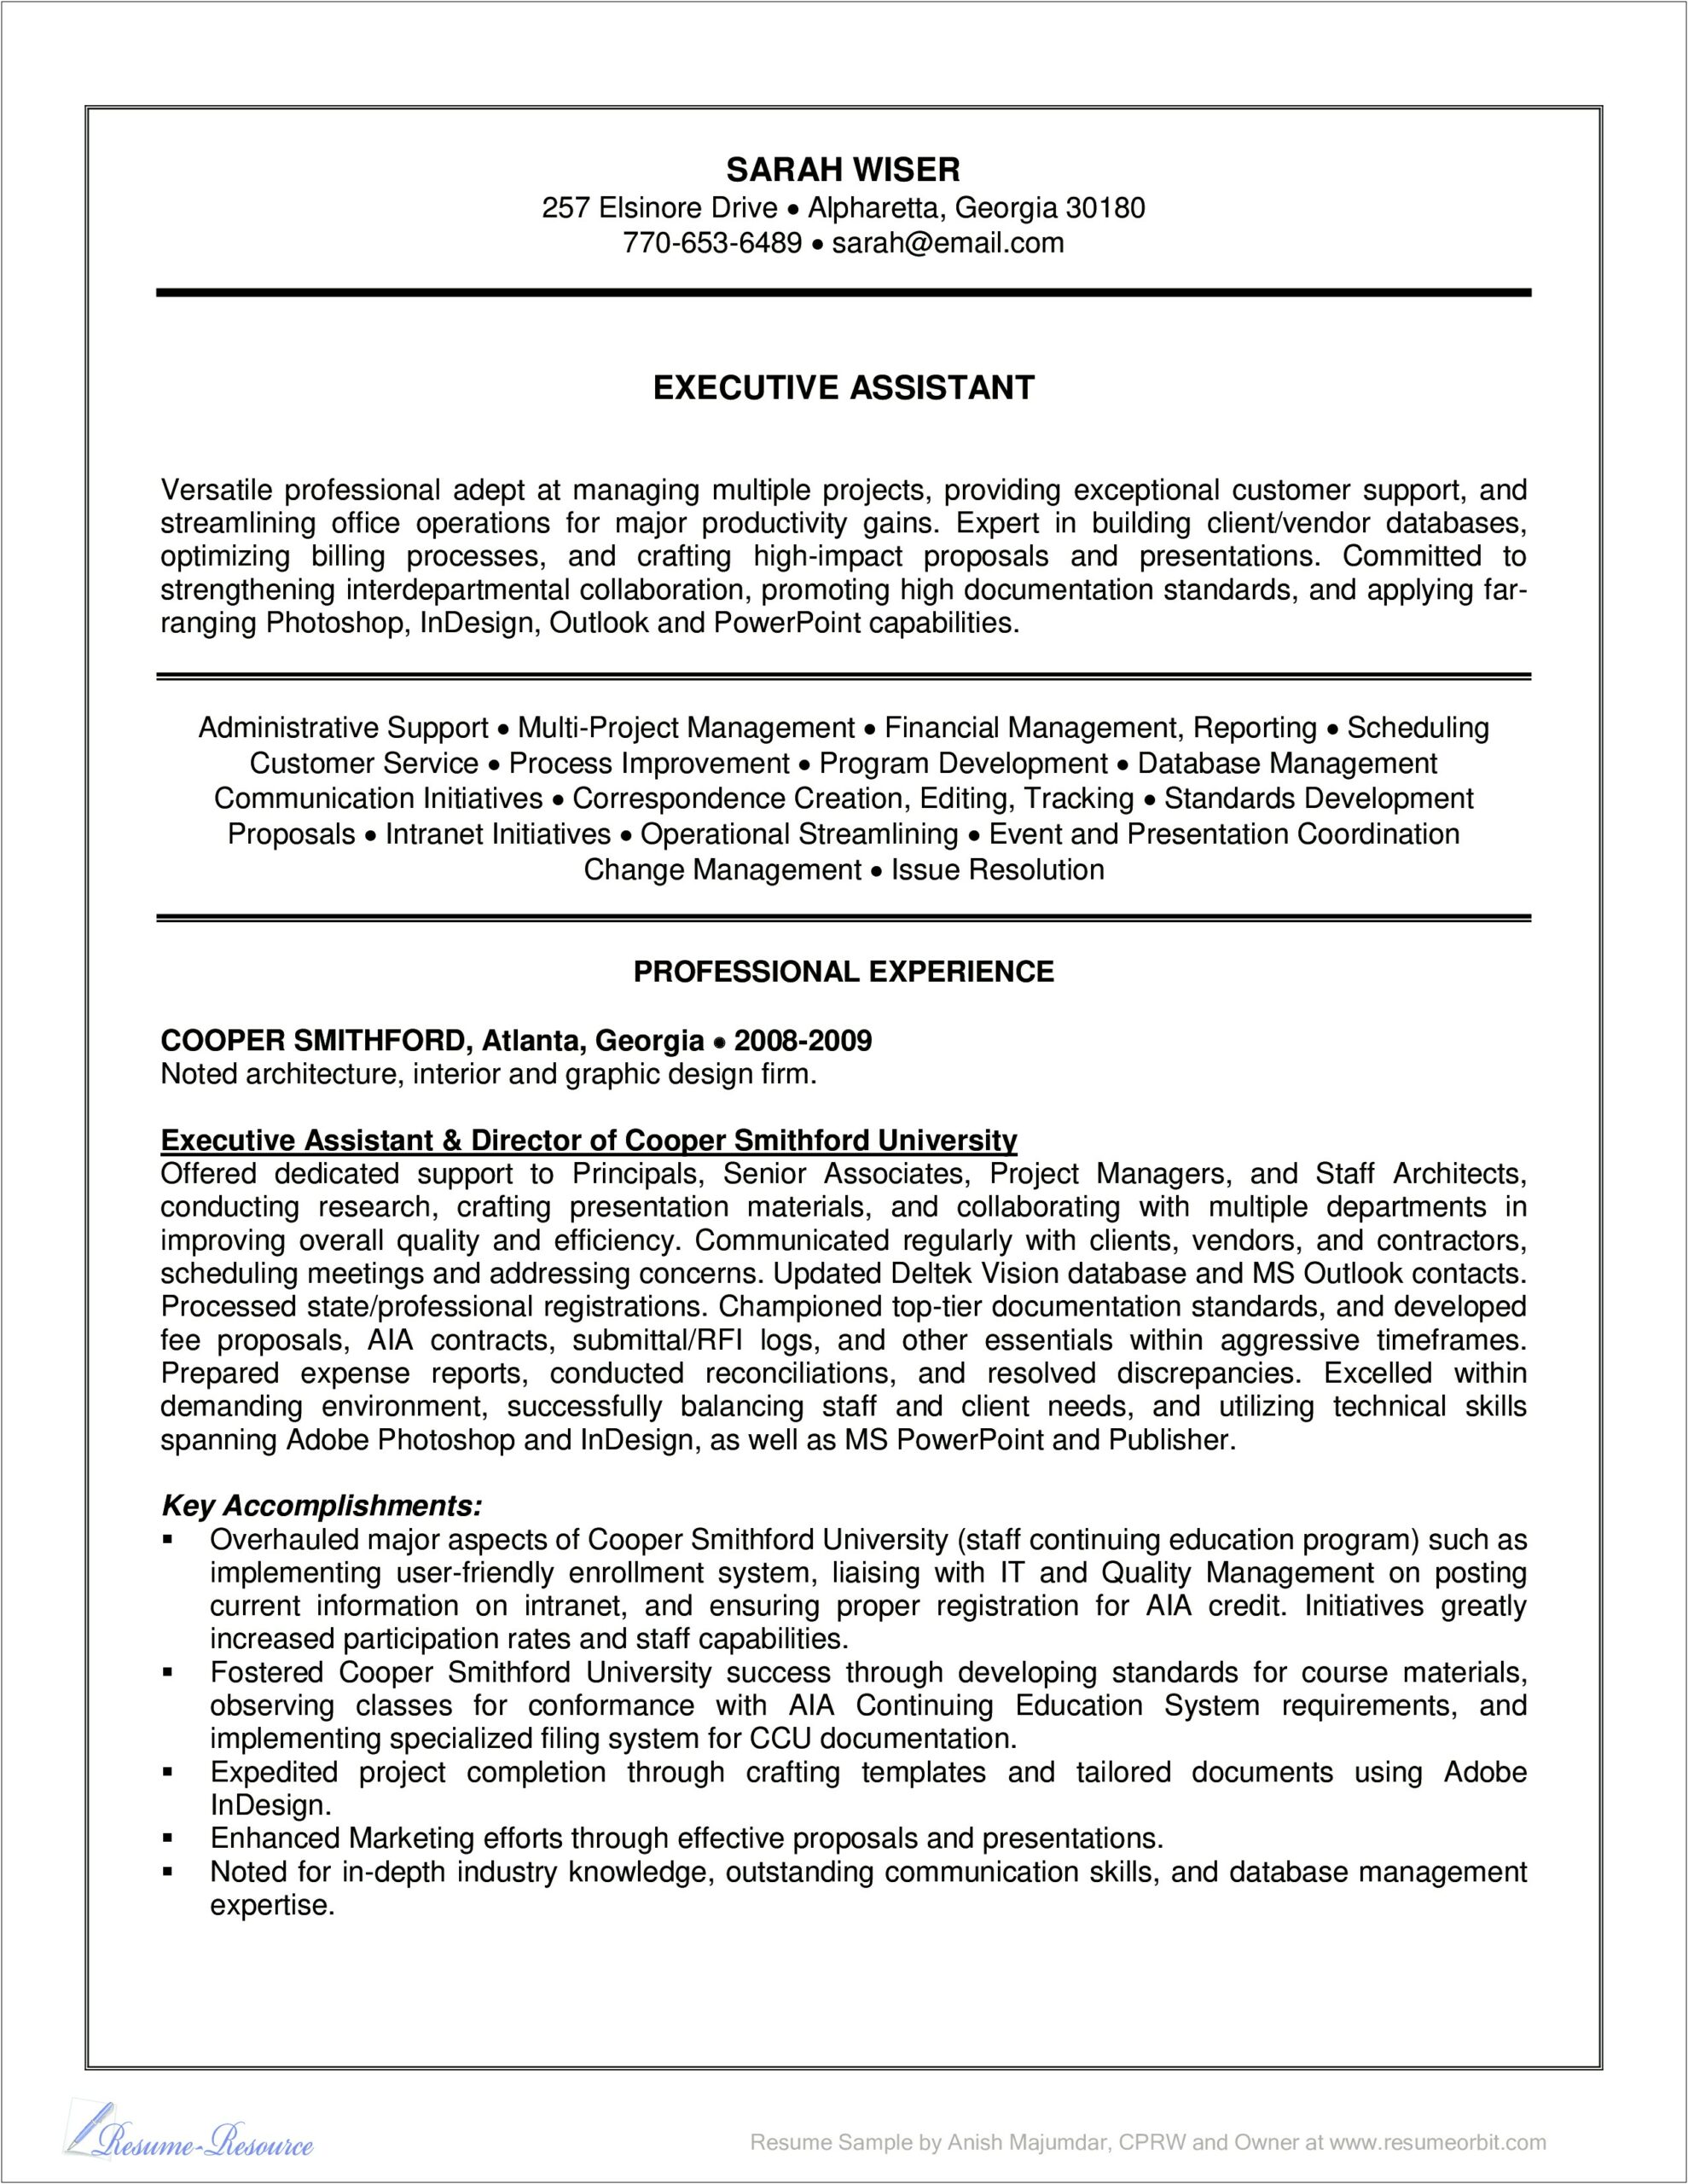 Samples Of Resumes For Executive Assistant